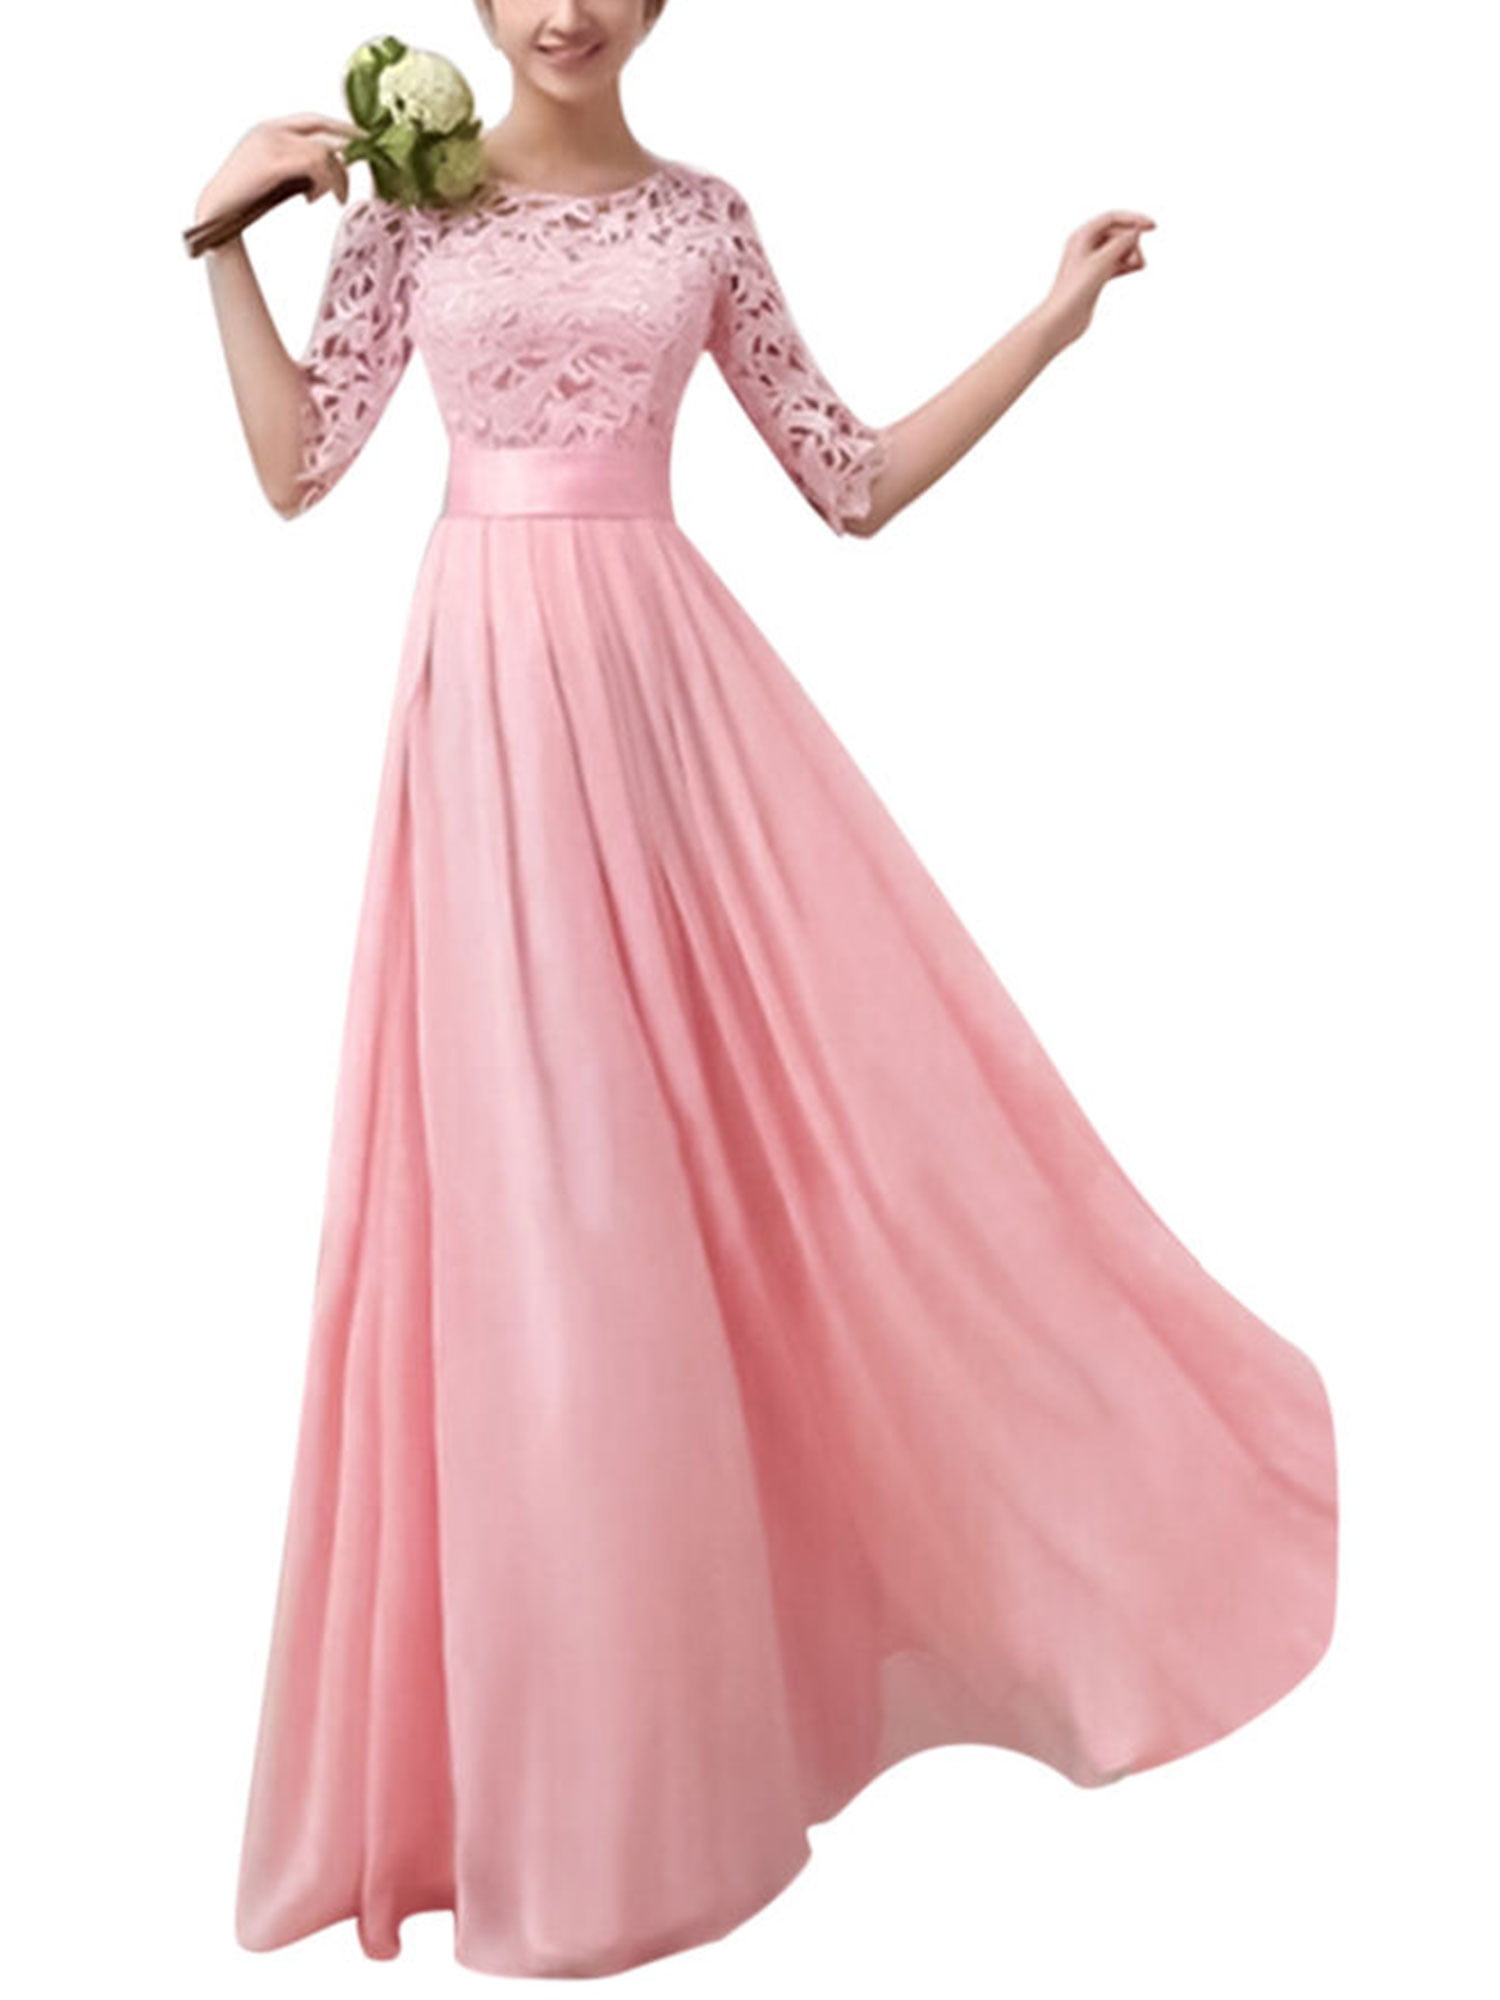 Women's Lace Bridesmaid Dresses Wedding Long Prom Formal Evening Party Ball Gown 